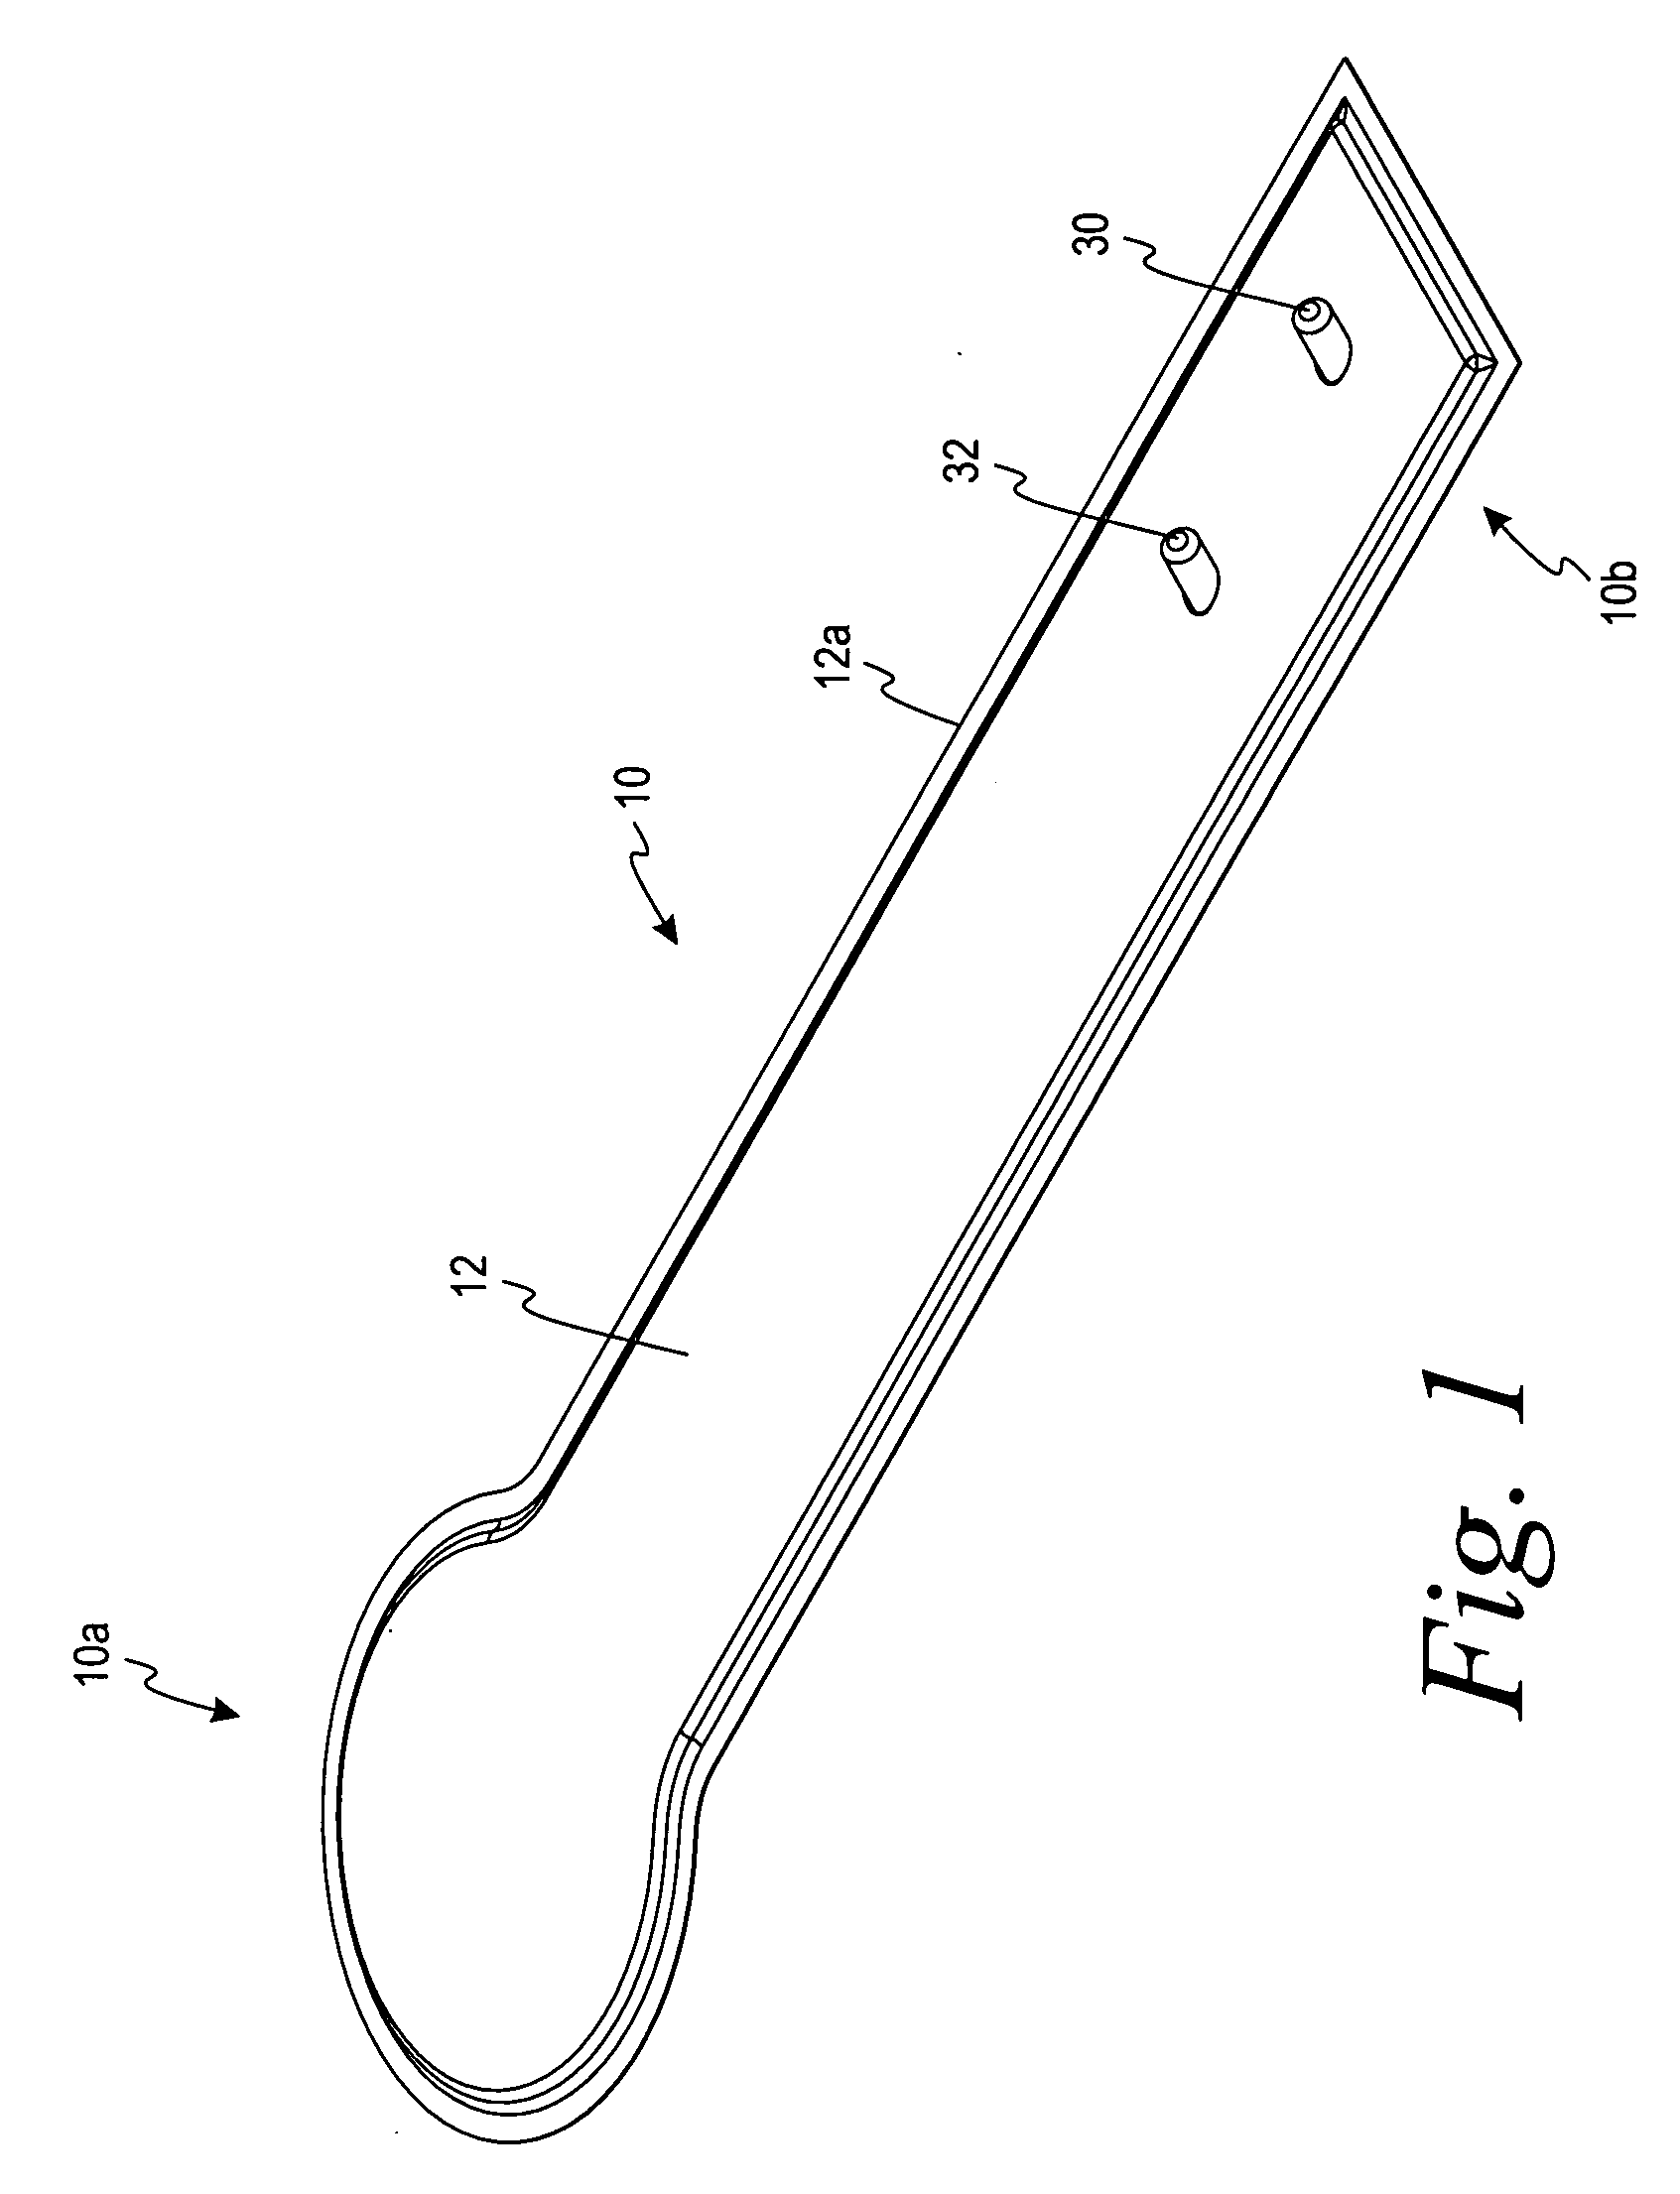 Flat-hose assembly for wound drainage system